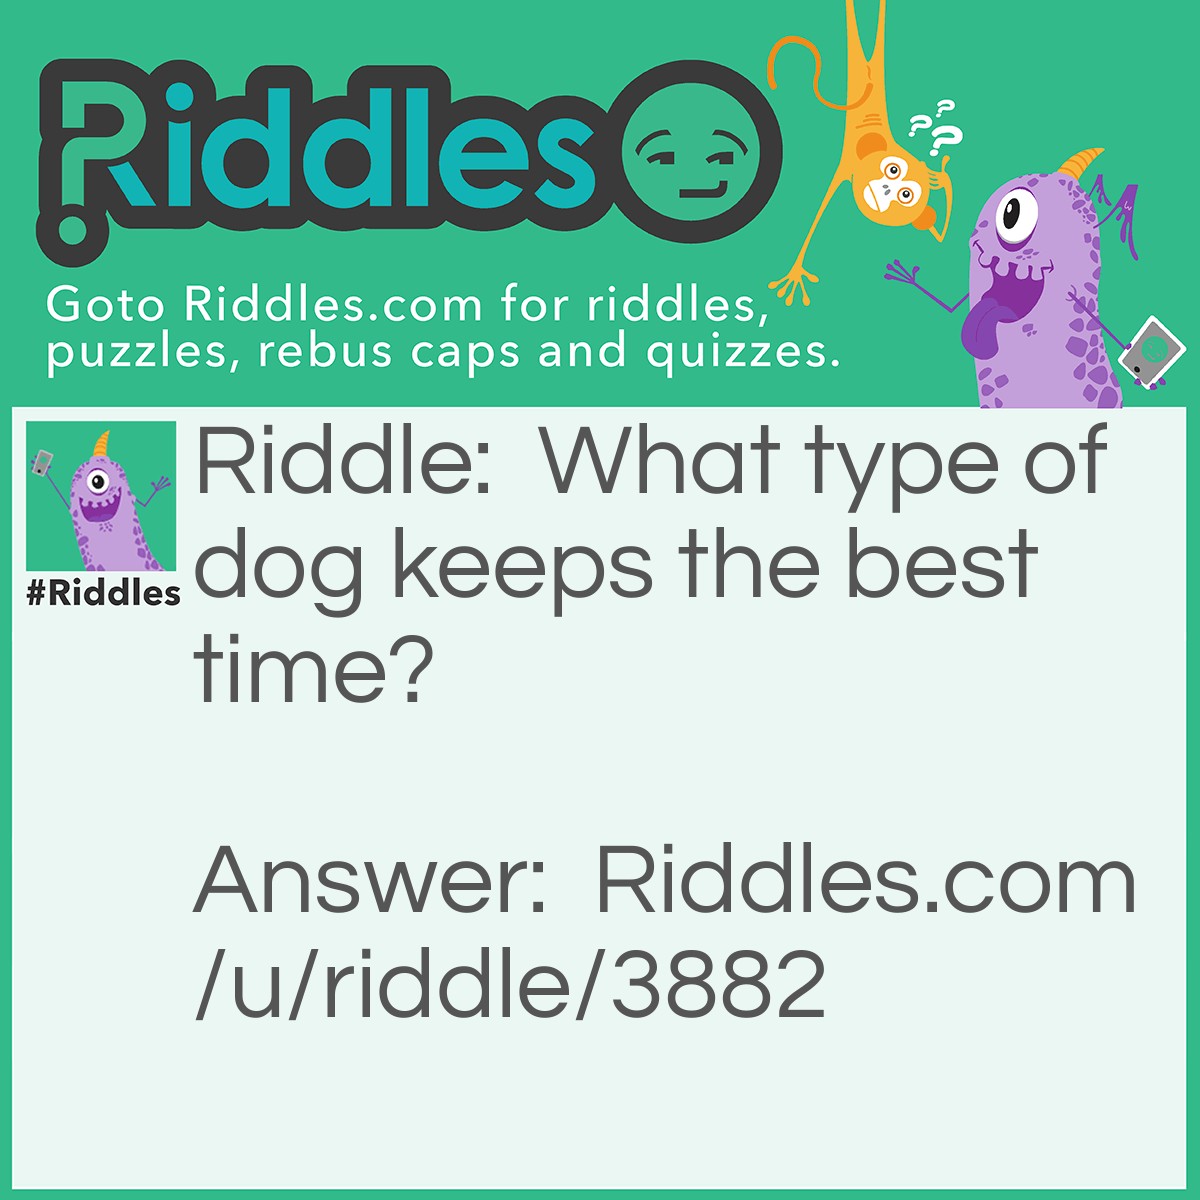 Riddle: What type of dog keeps the best time? Answer: A watchdog.